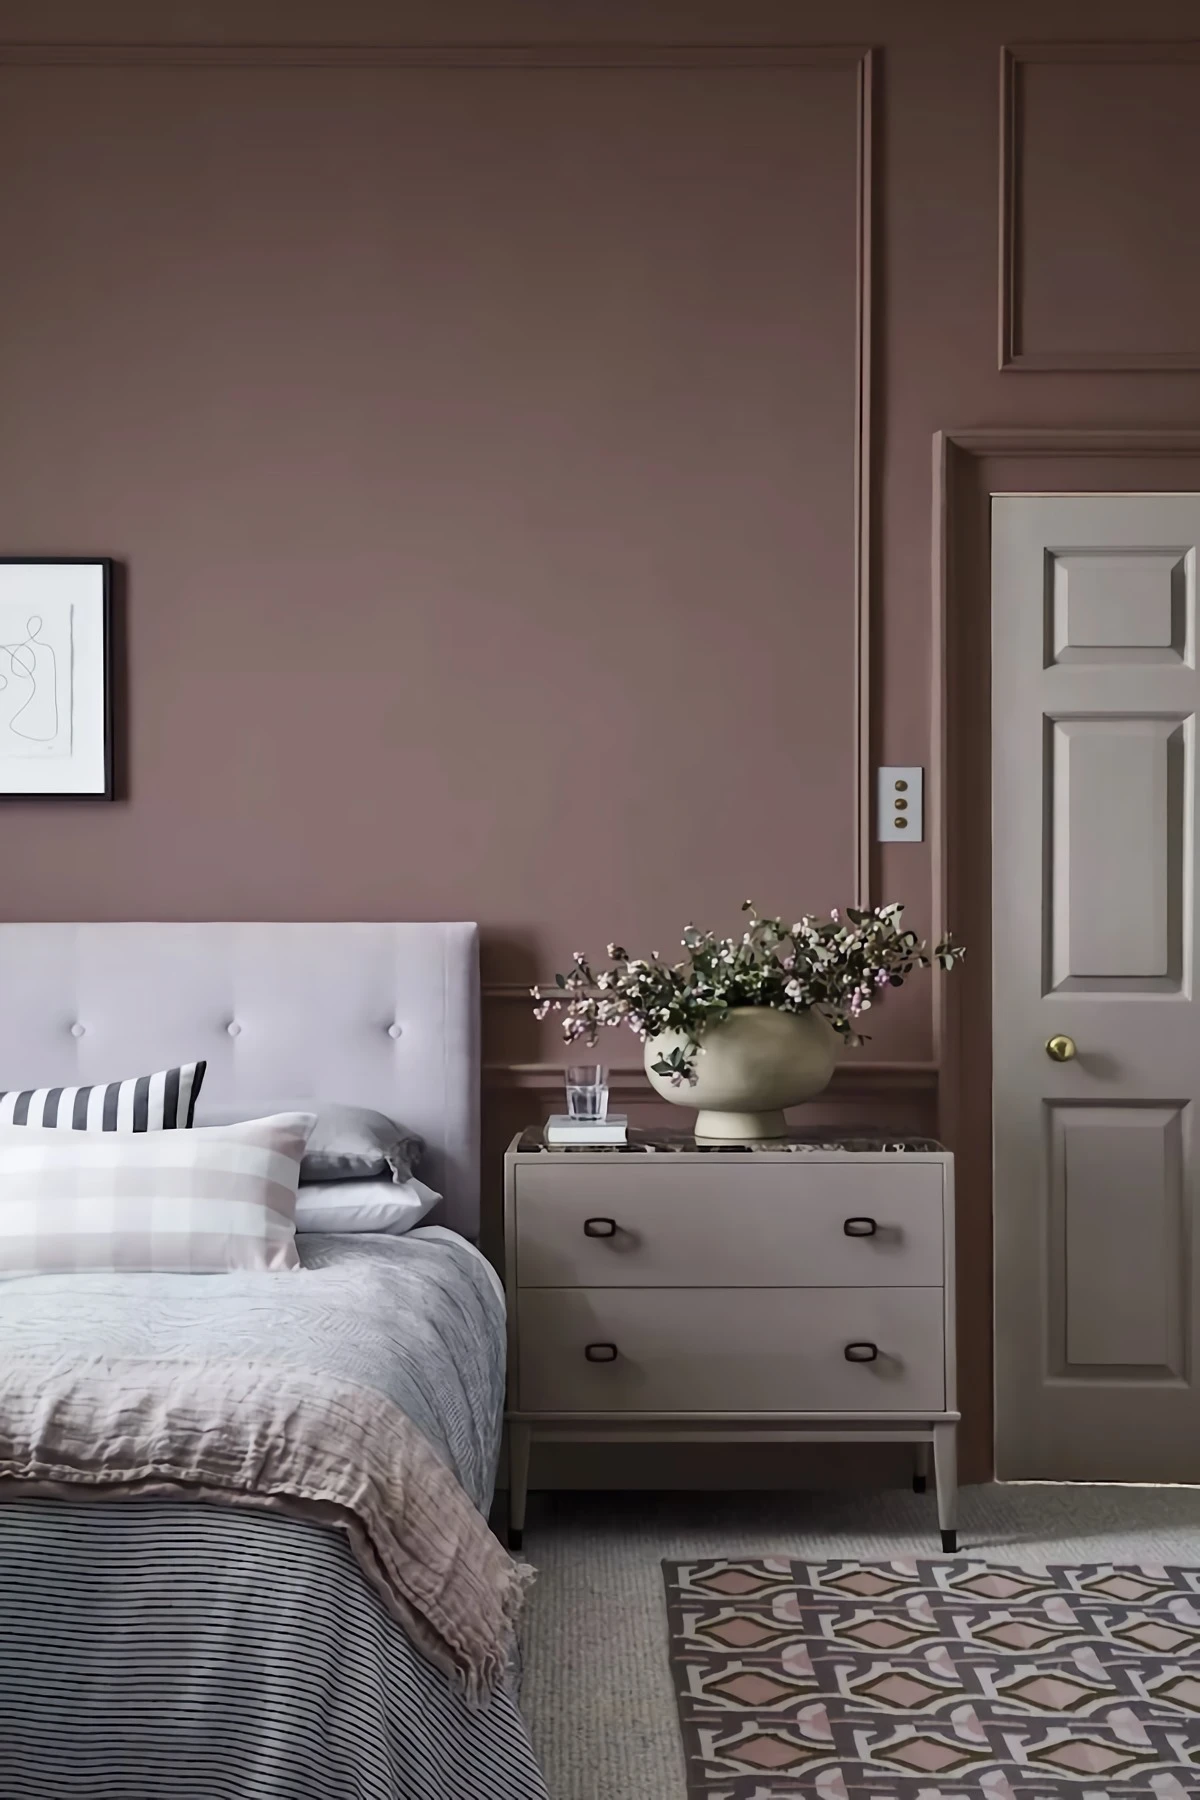 color drenching room in gray rose